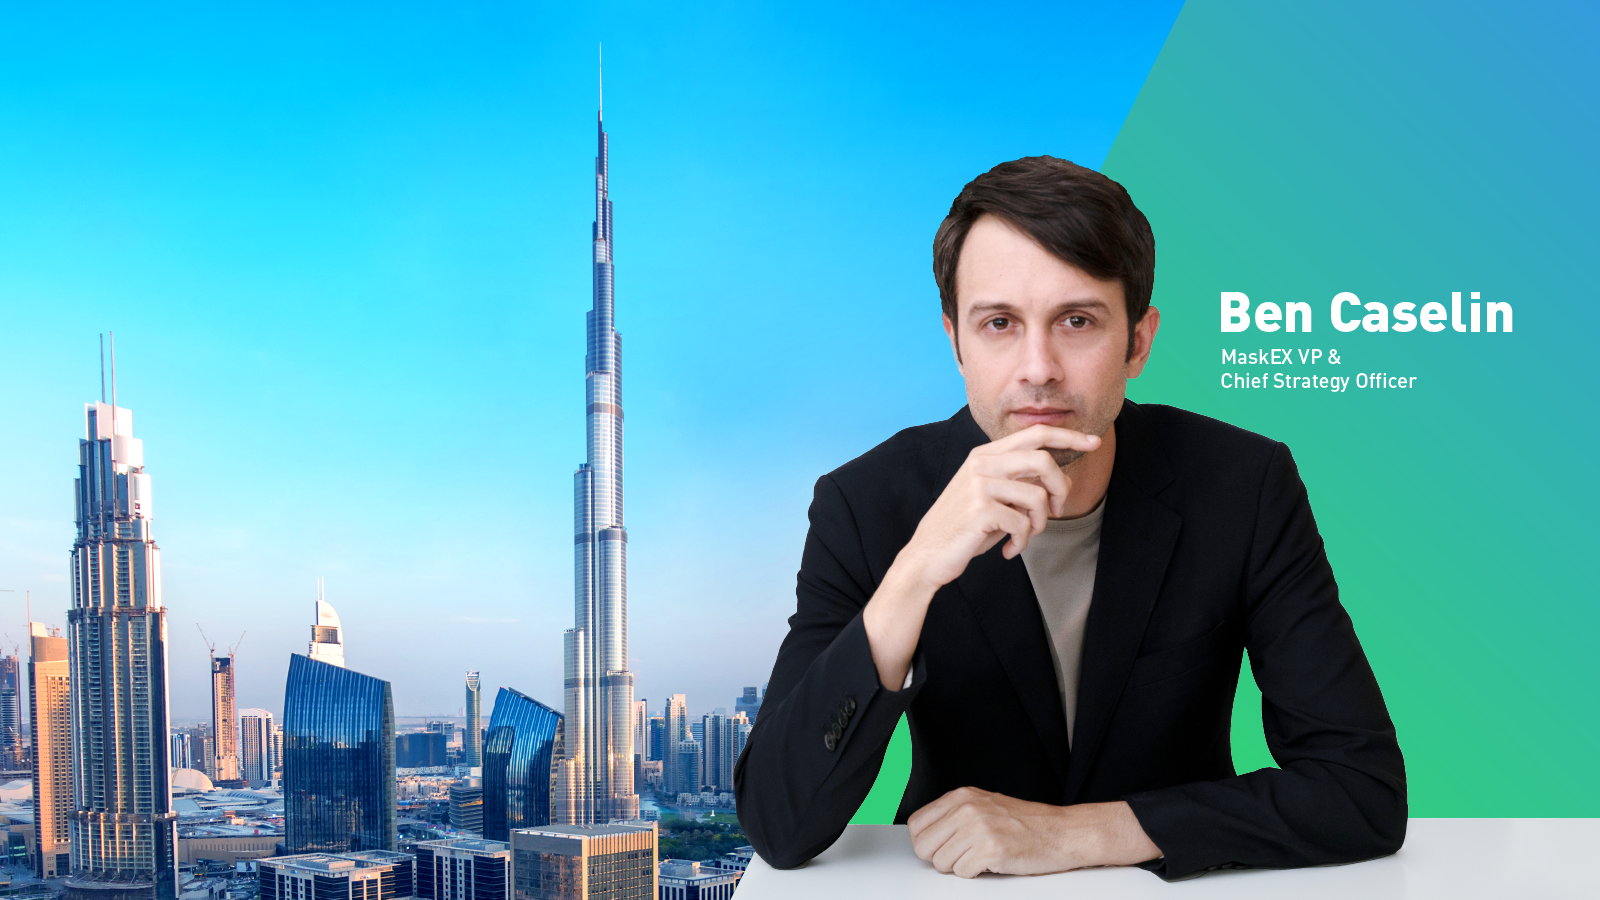 UAE's Clear Rules and Openness to 'Experimentation' Key to Attracting Crypto Firms, Says Ben Caselin of Maskex